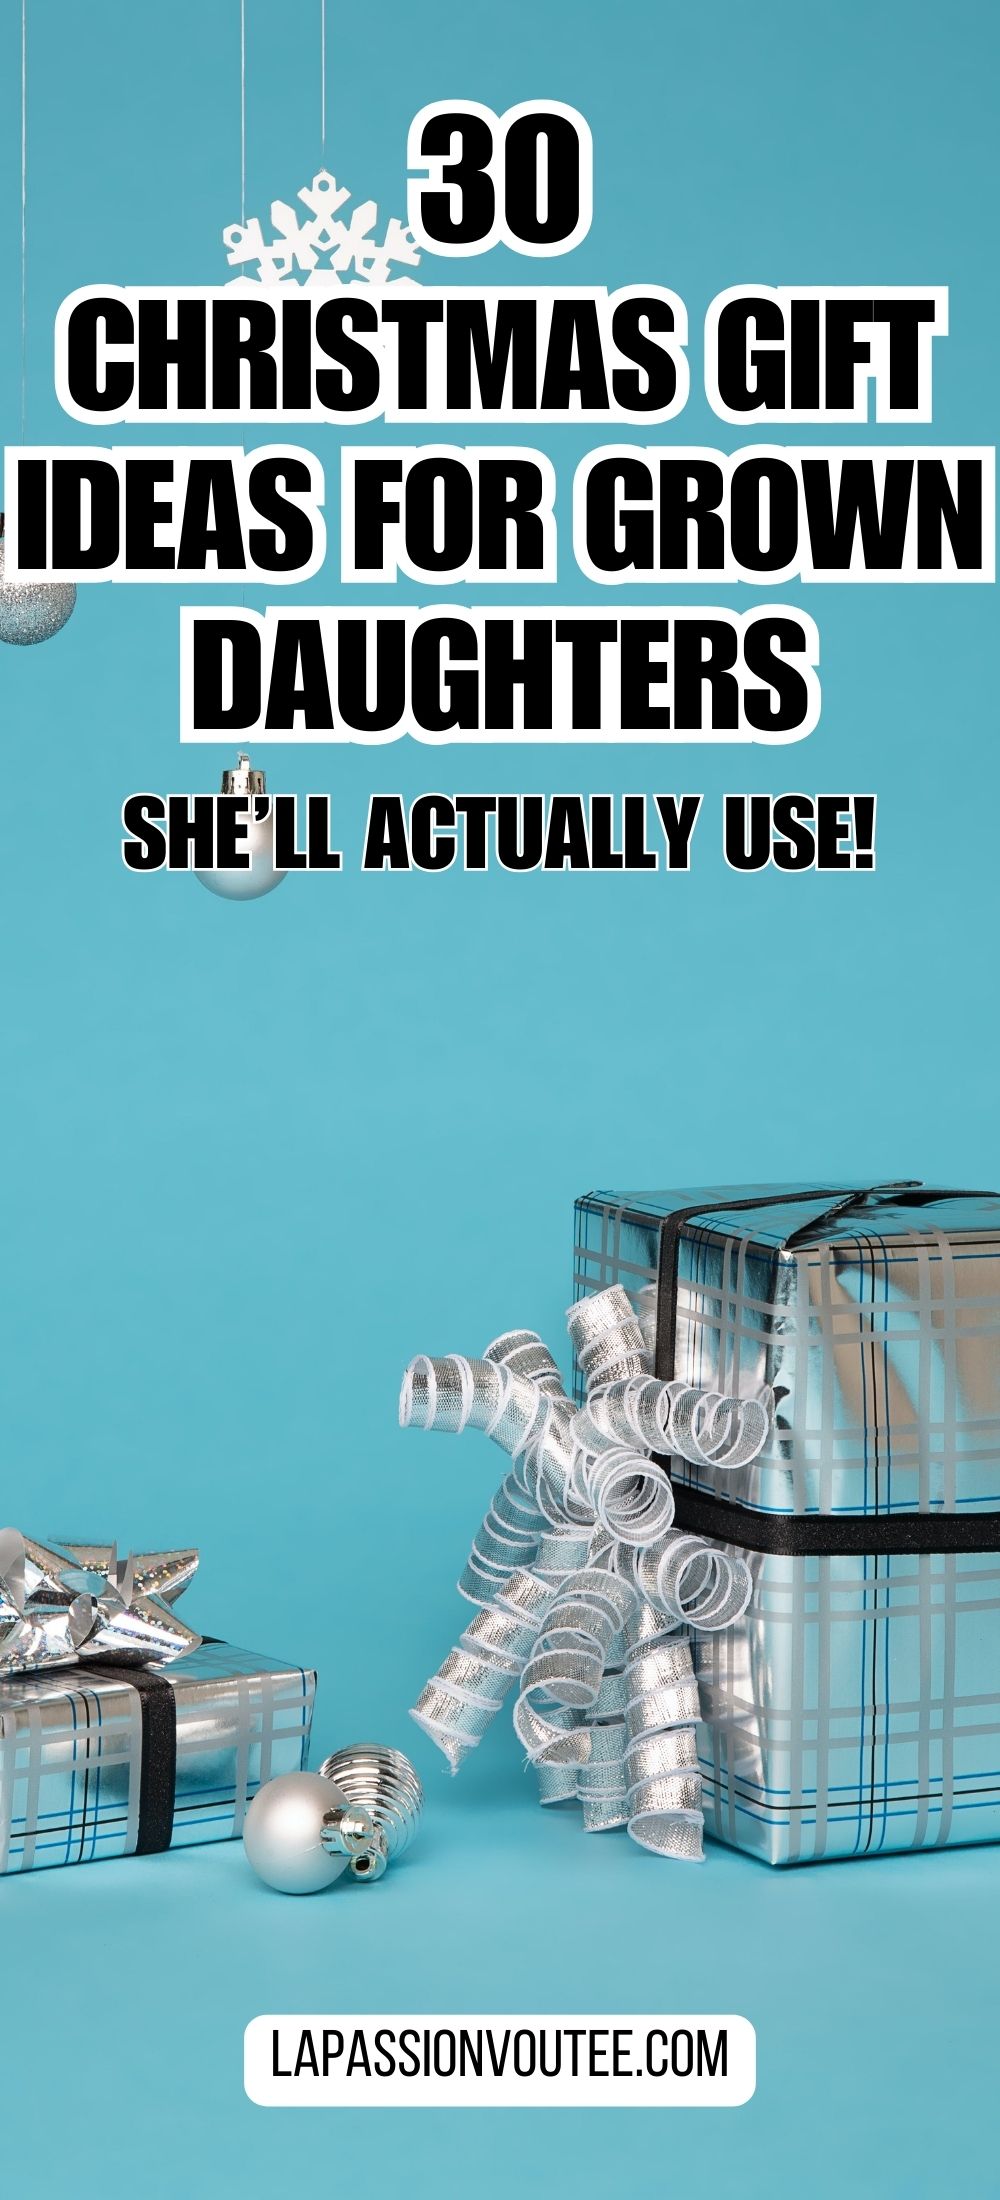 Christmas Gift Ideas for Daughters 3